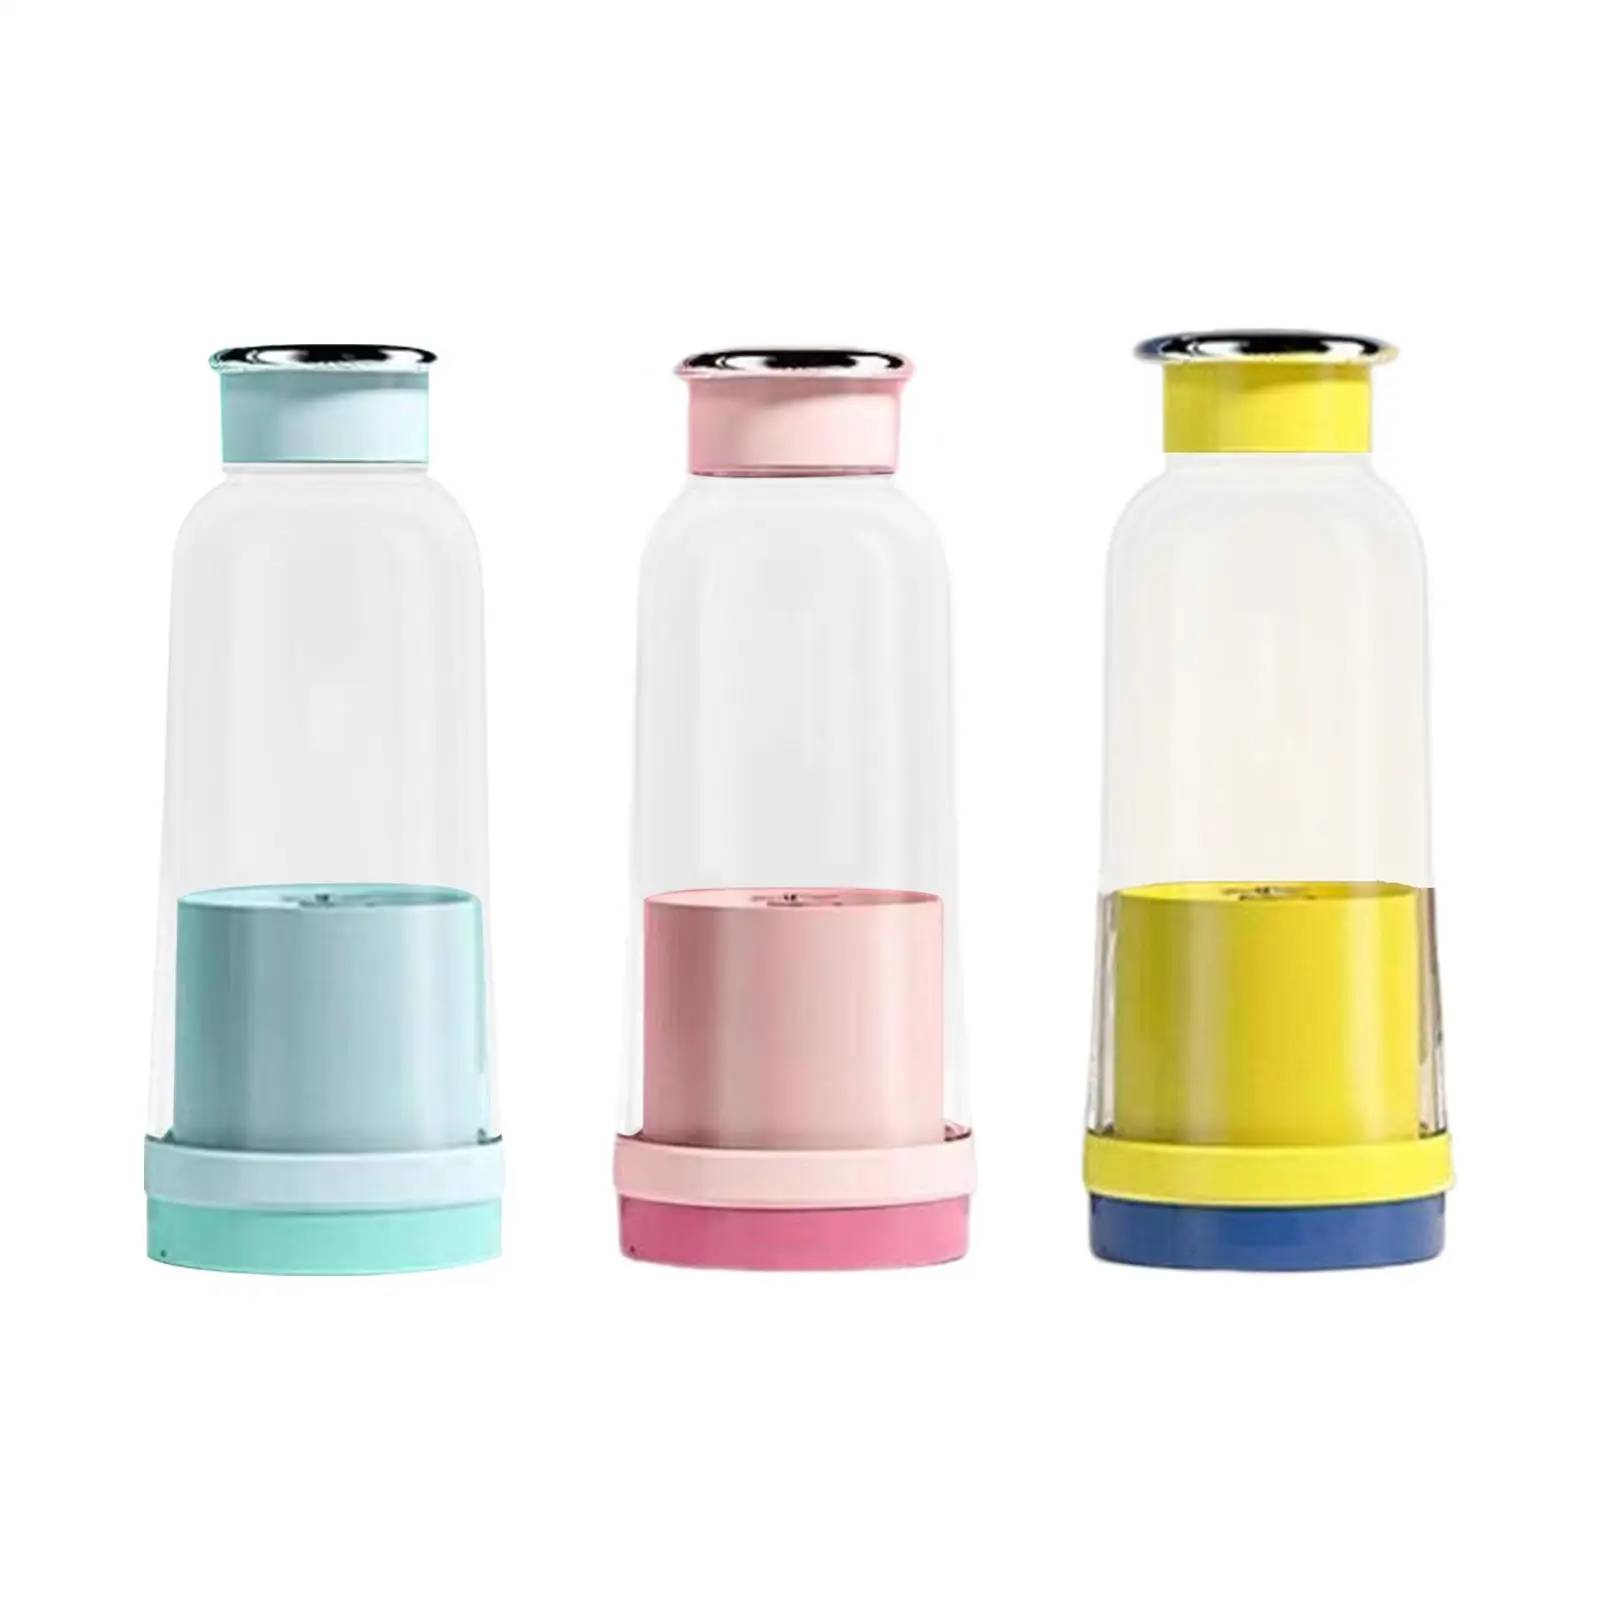 Handheld Juice Cup Personal Juicer USB Rechargeable Fruit Mixer Food Shaker Shaking Cup for Sports Kitchen Office Travel Camping